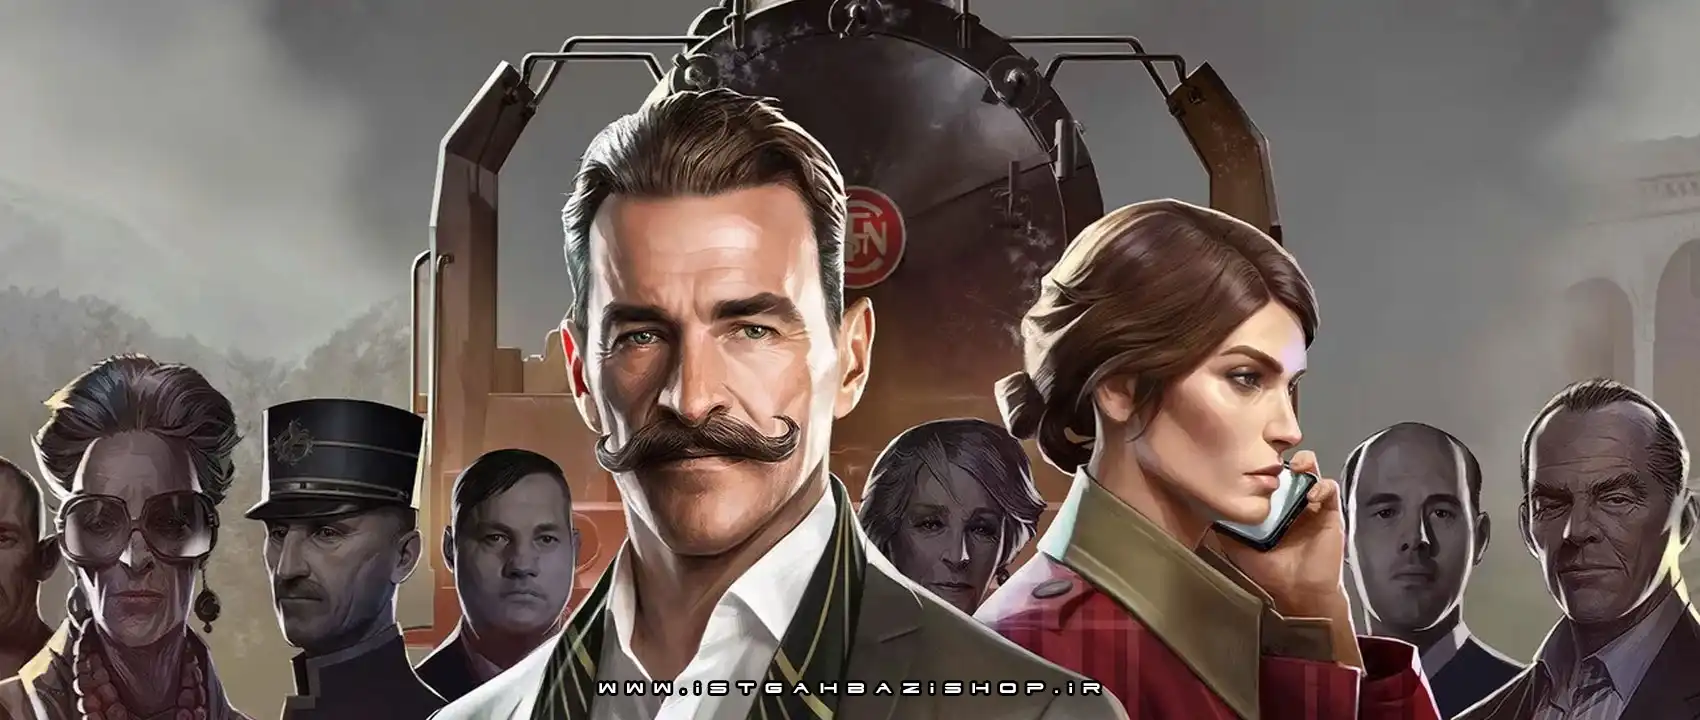 Agatha Christie - Murder on the Orient Express Ps4